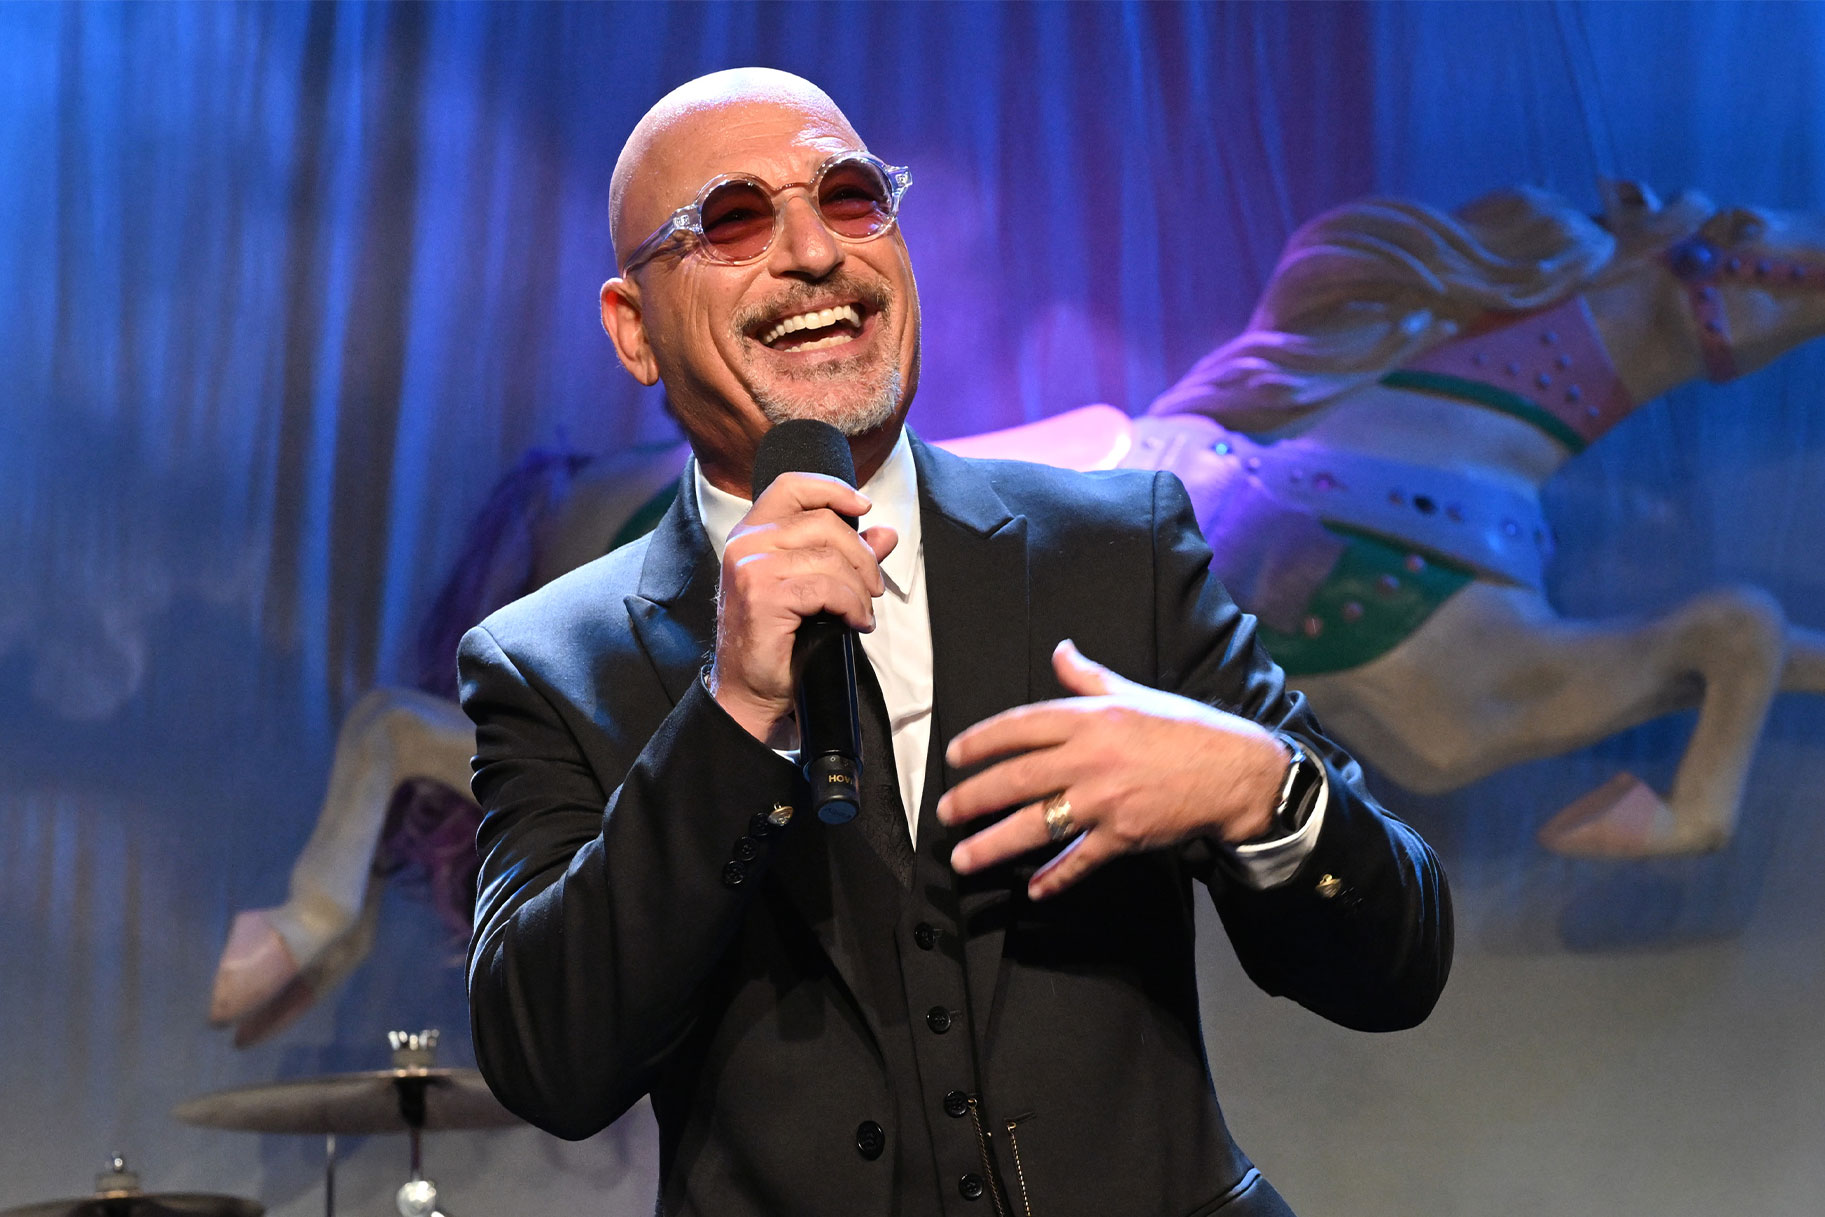 Howie Mandel smiling and speaking into a mic onstage